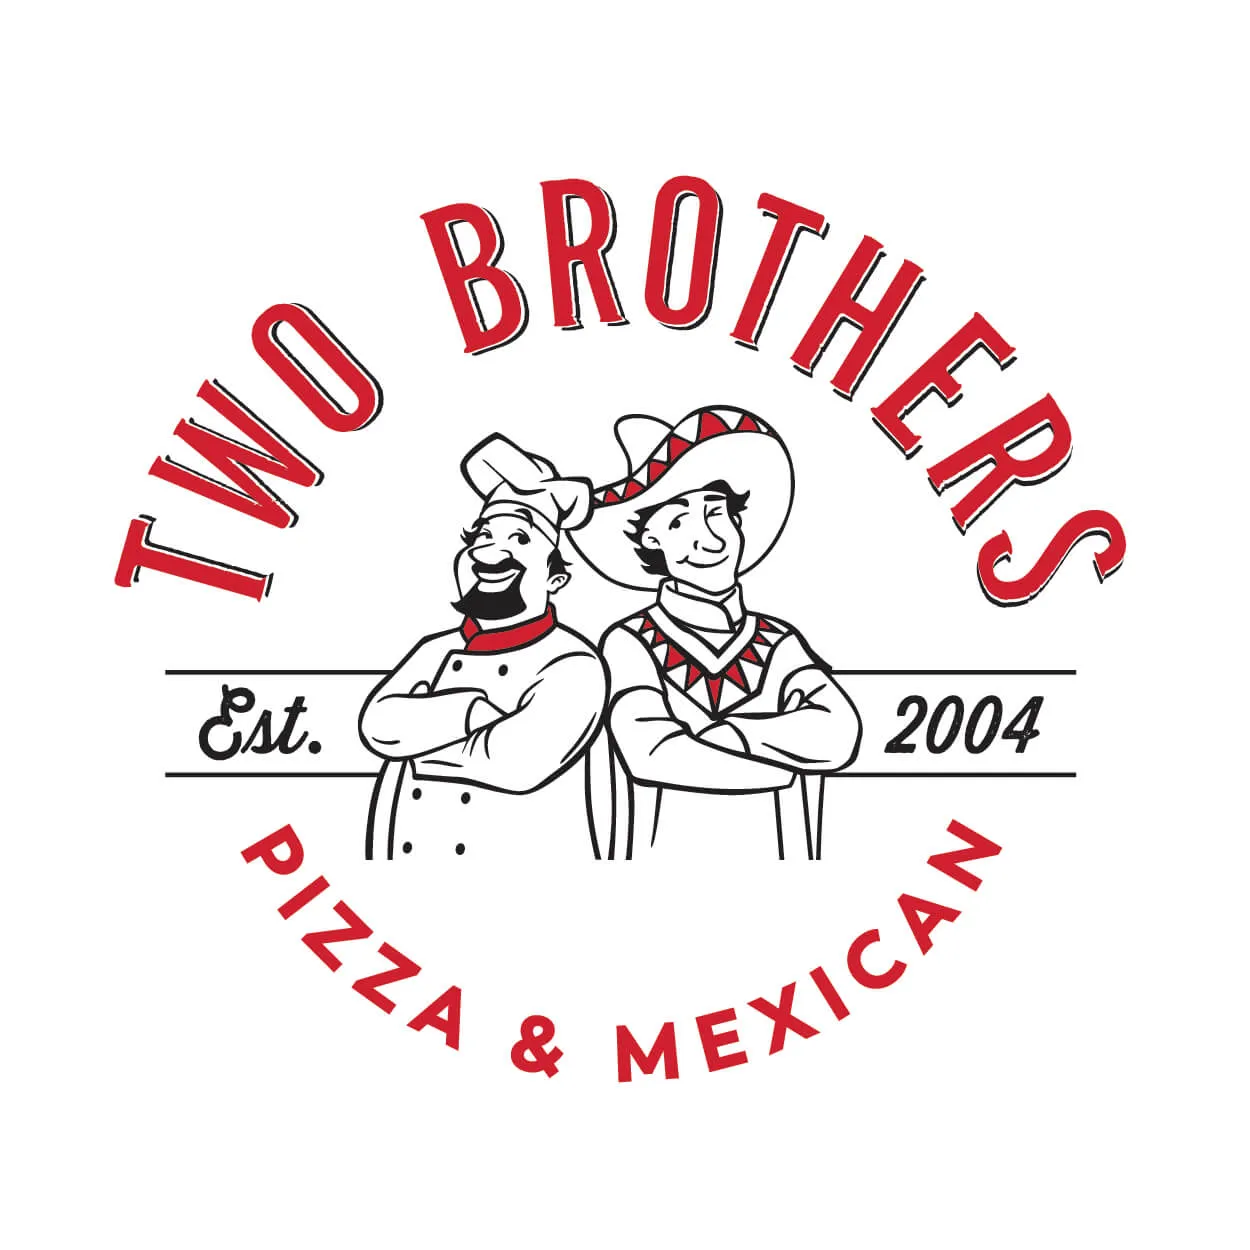 Two Brothers Pizza